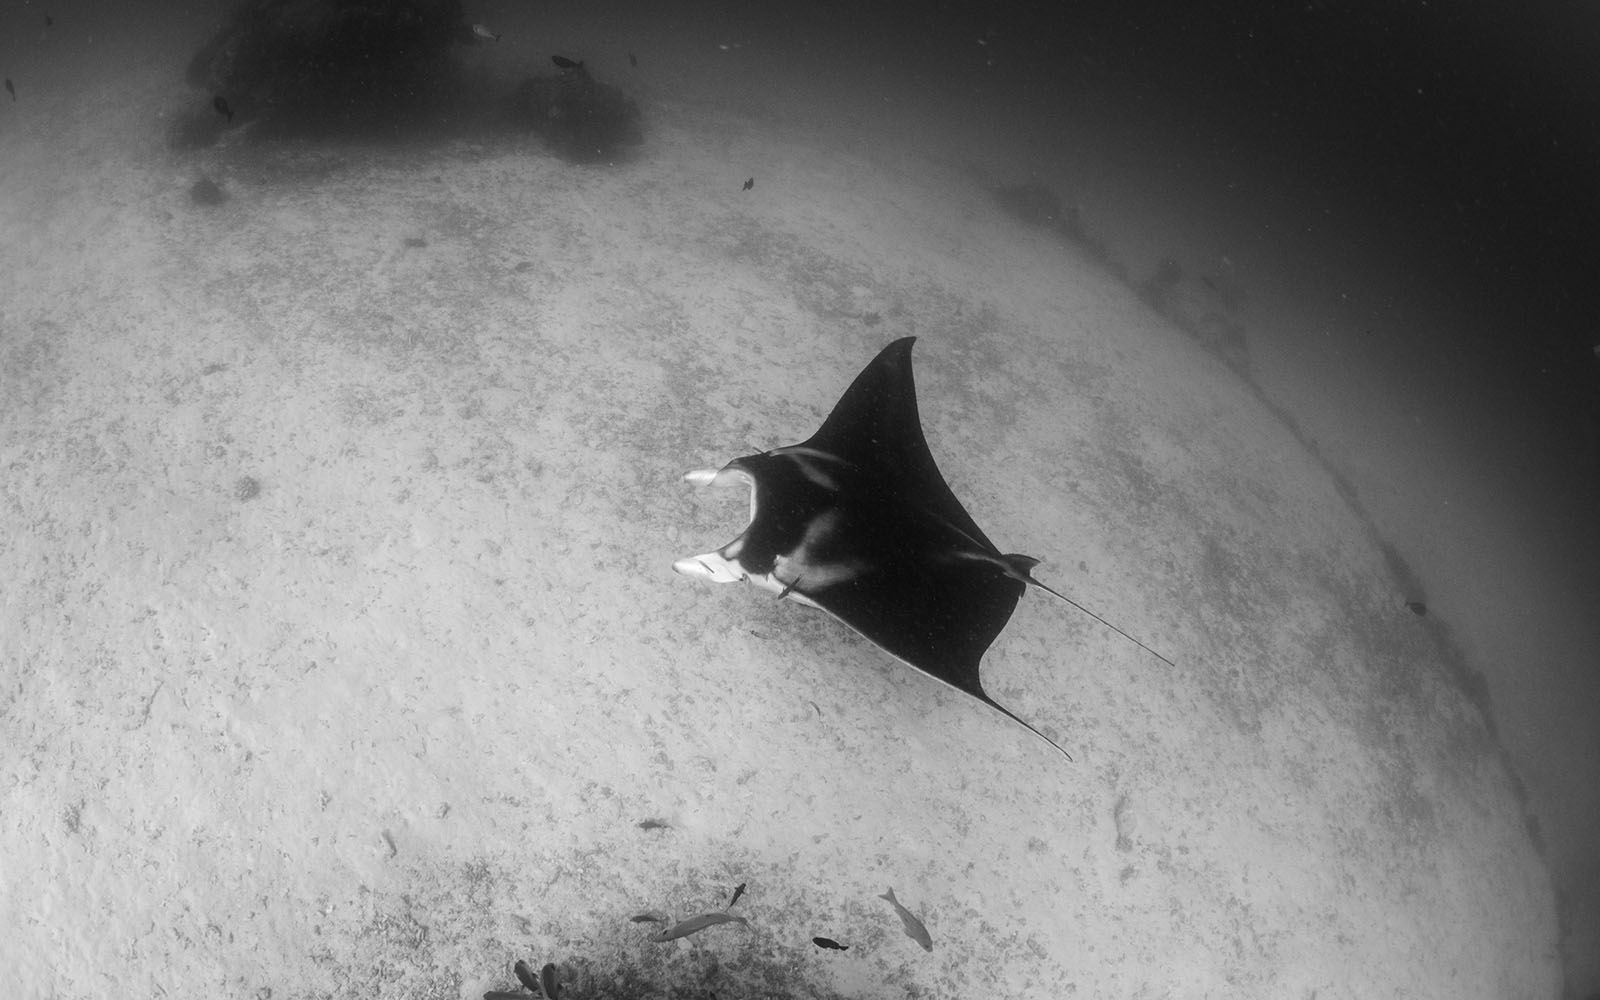 Reef manta ray photographed by Snorkel Vacations on a snorkeling trip to Raja Ampat